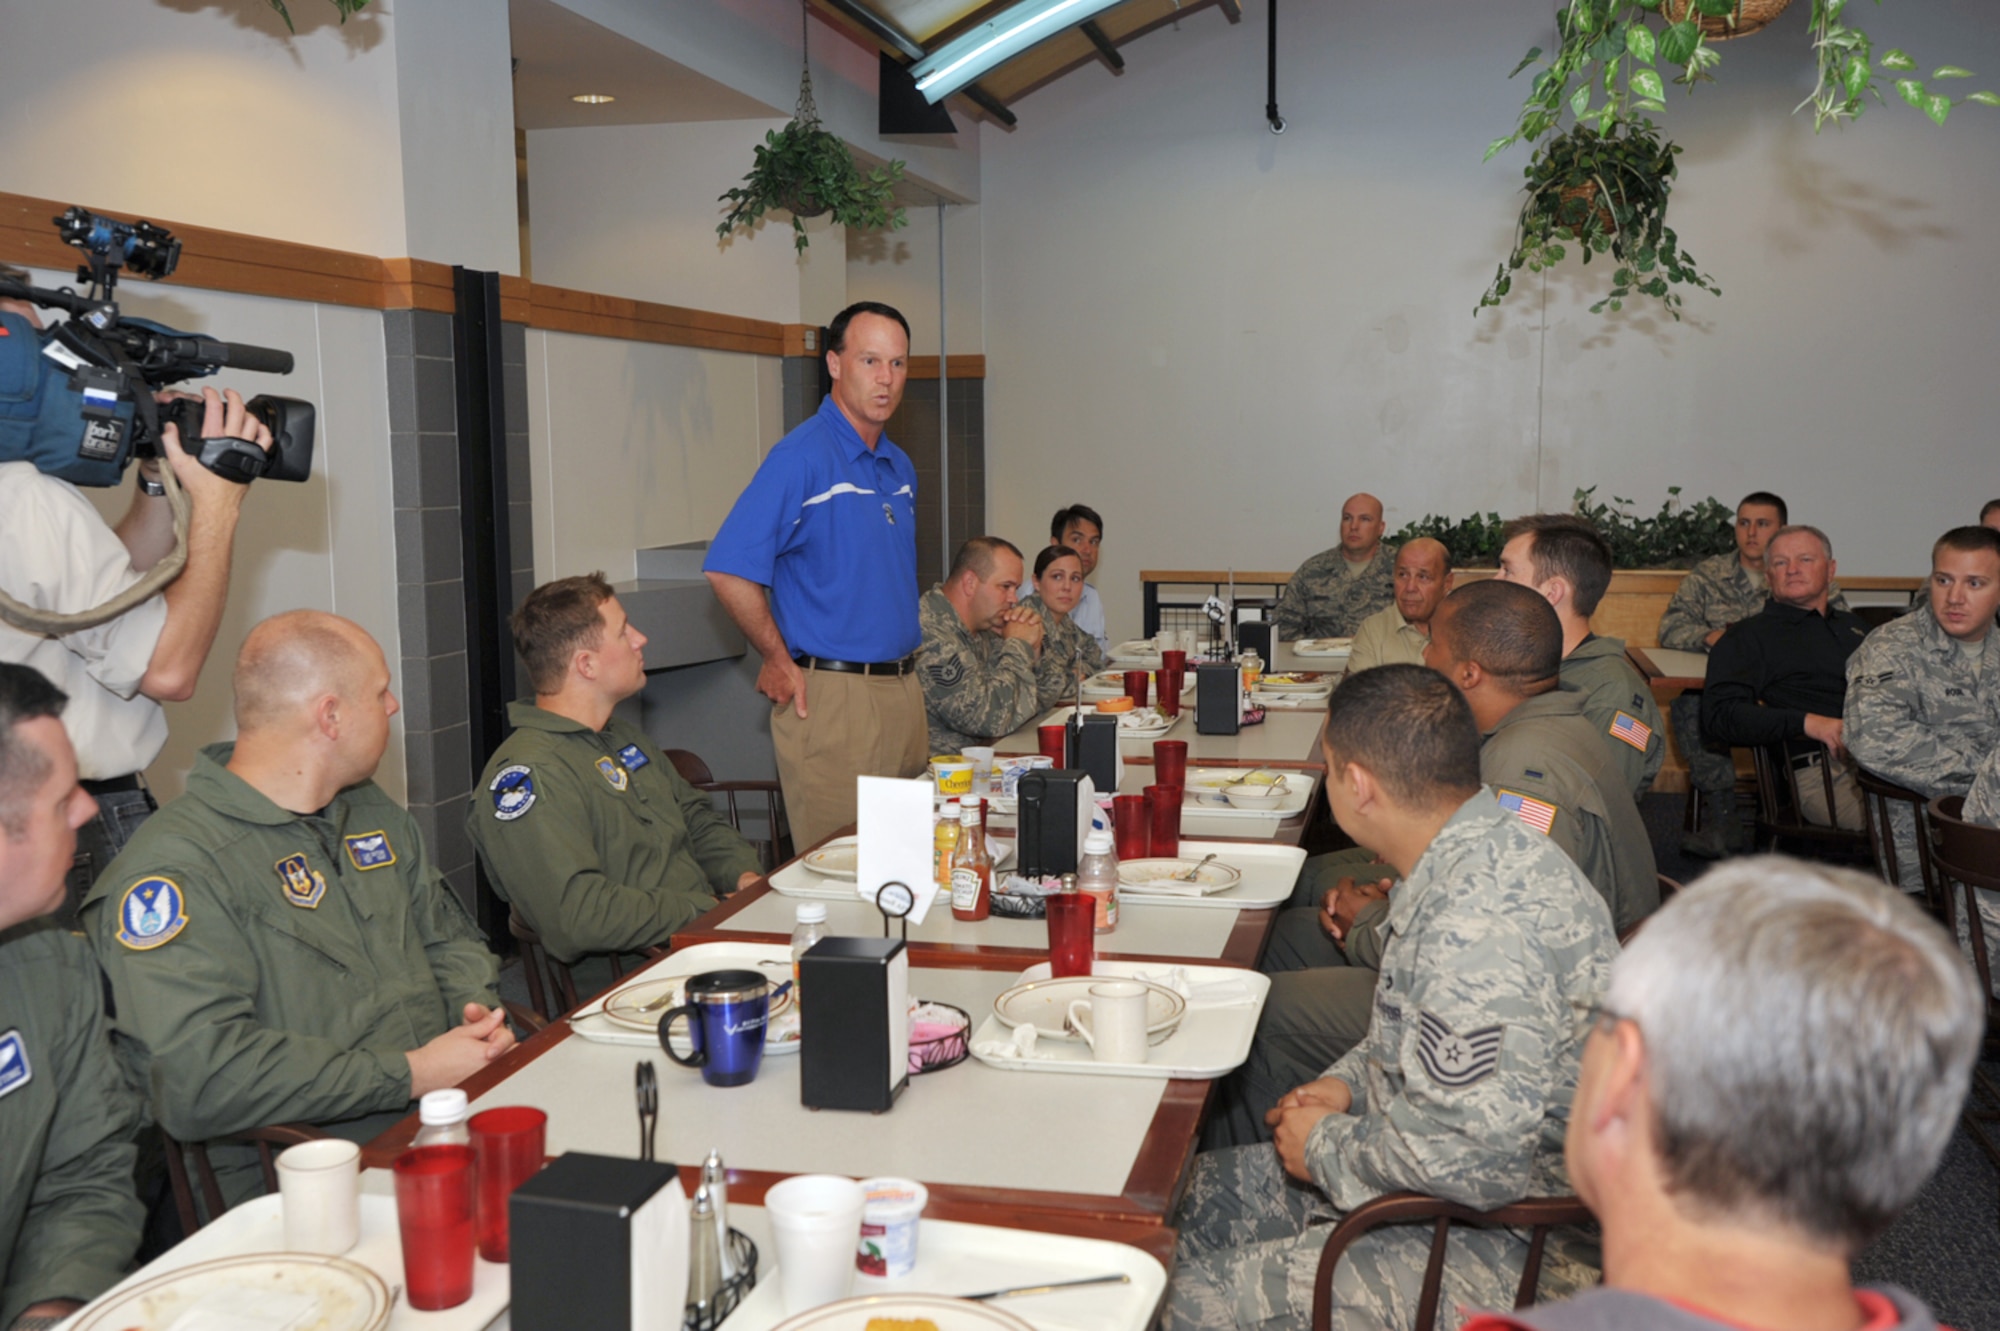 Troy Calhoun, head football coach at the Air Force Academy, talks to Airman during a breakfast at McConnell Air Force Base, Kan., on May 28. Coaches Tour 2009, a morale-boosting mission that brought NCAA football coaches to U.S. servicemembers, started at McConnell before a KC-135 Stratotanker from the base was used to fly the coaches overseas. (U.S. Air Force photo/Tech. Sgt. Jason Schaap)